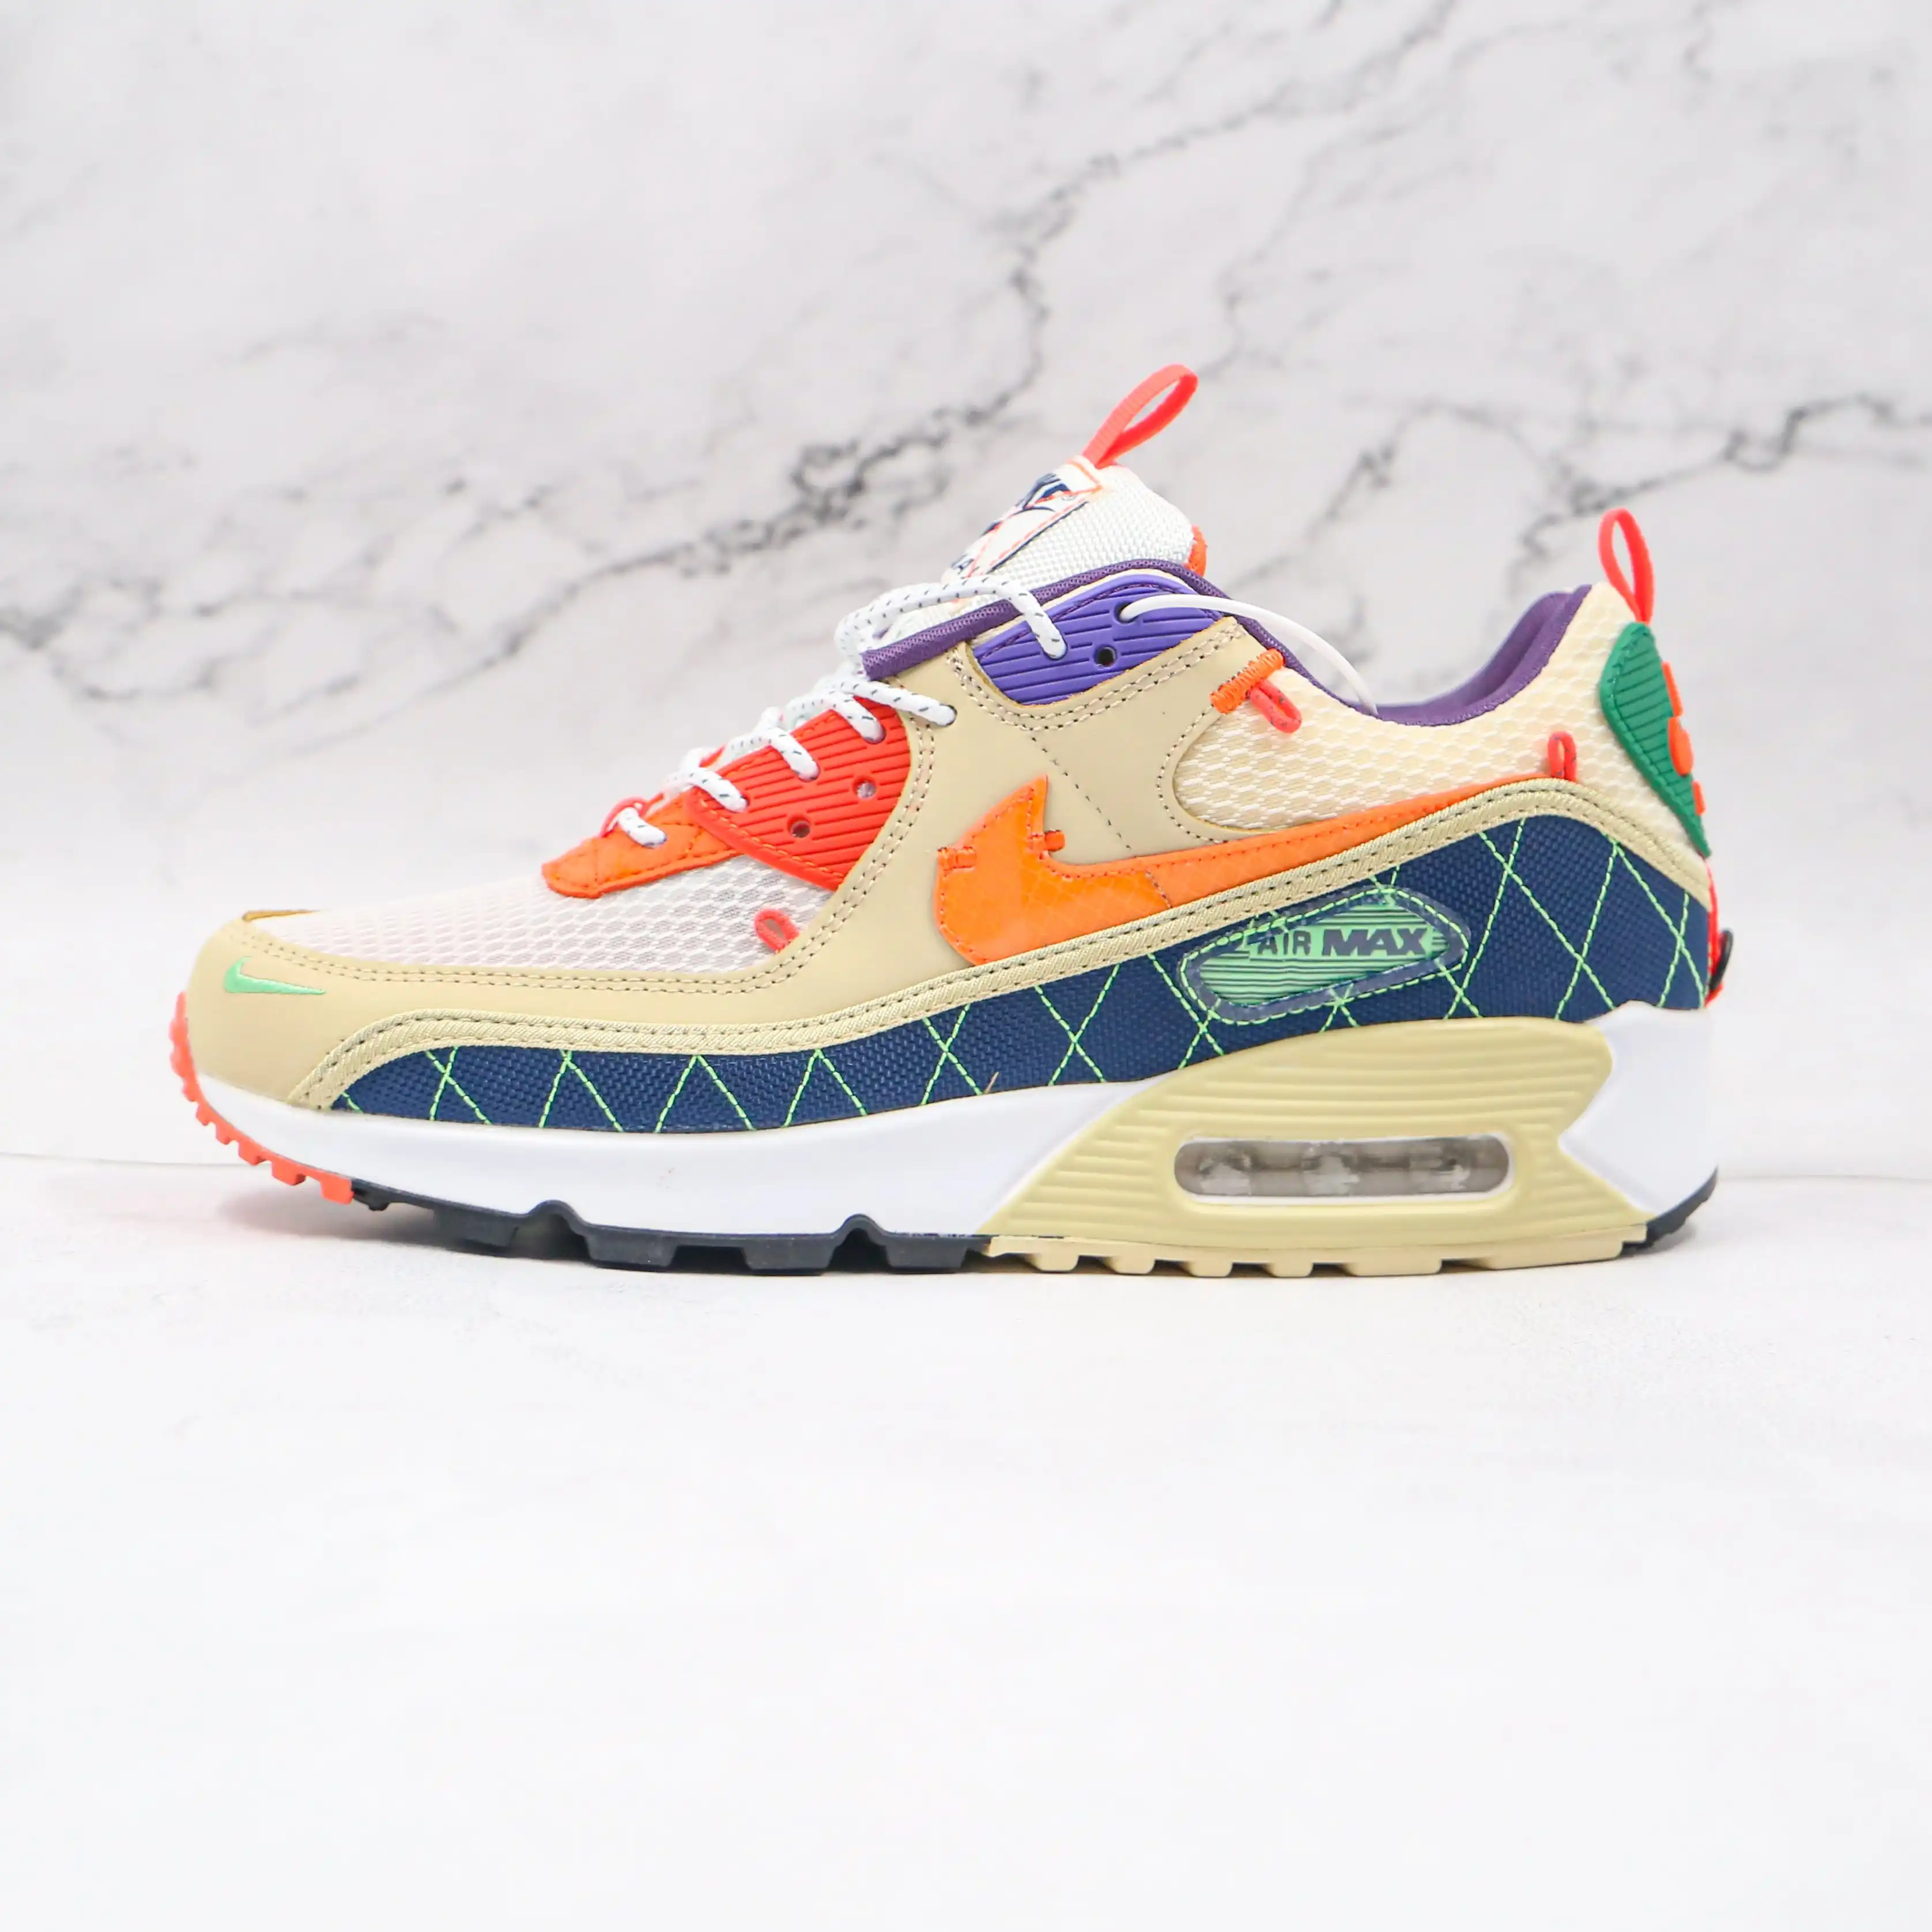 Sneakers Air Max 90 China Trade,Buy China Direct From Sneakers Air 